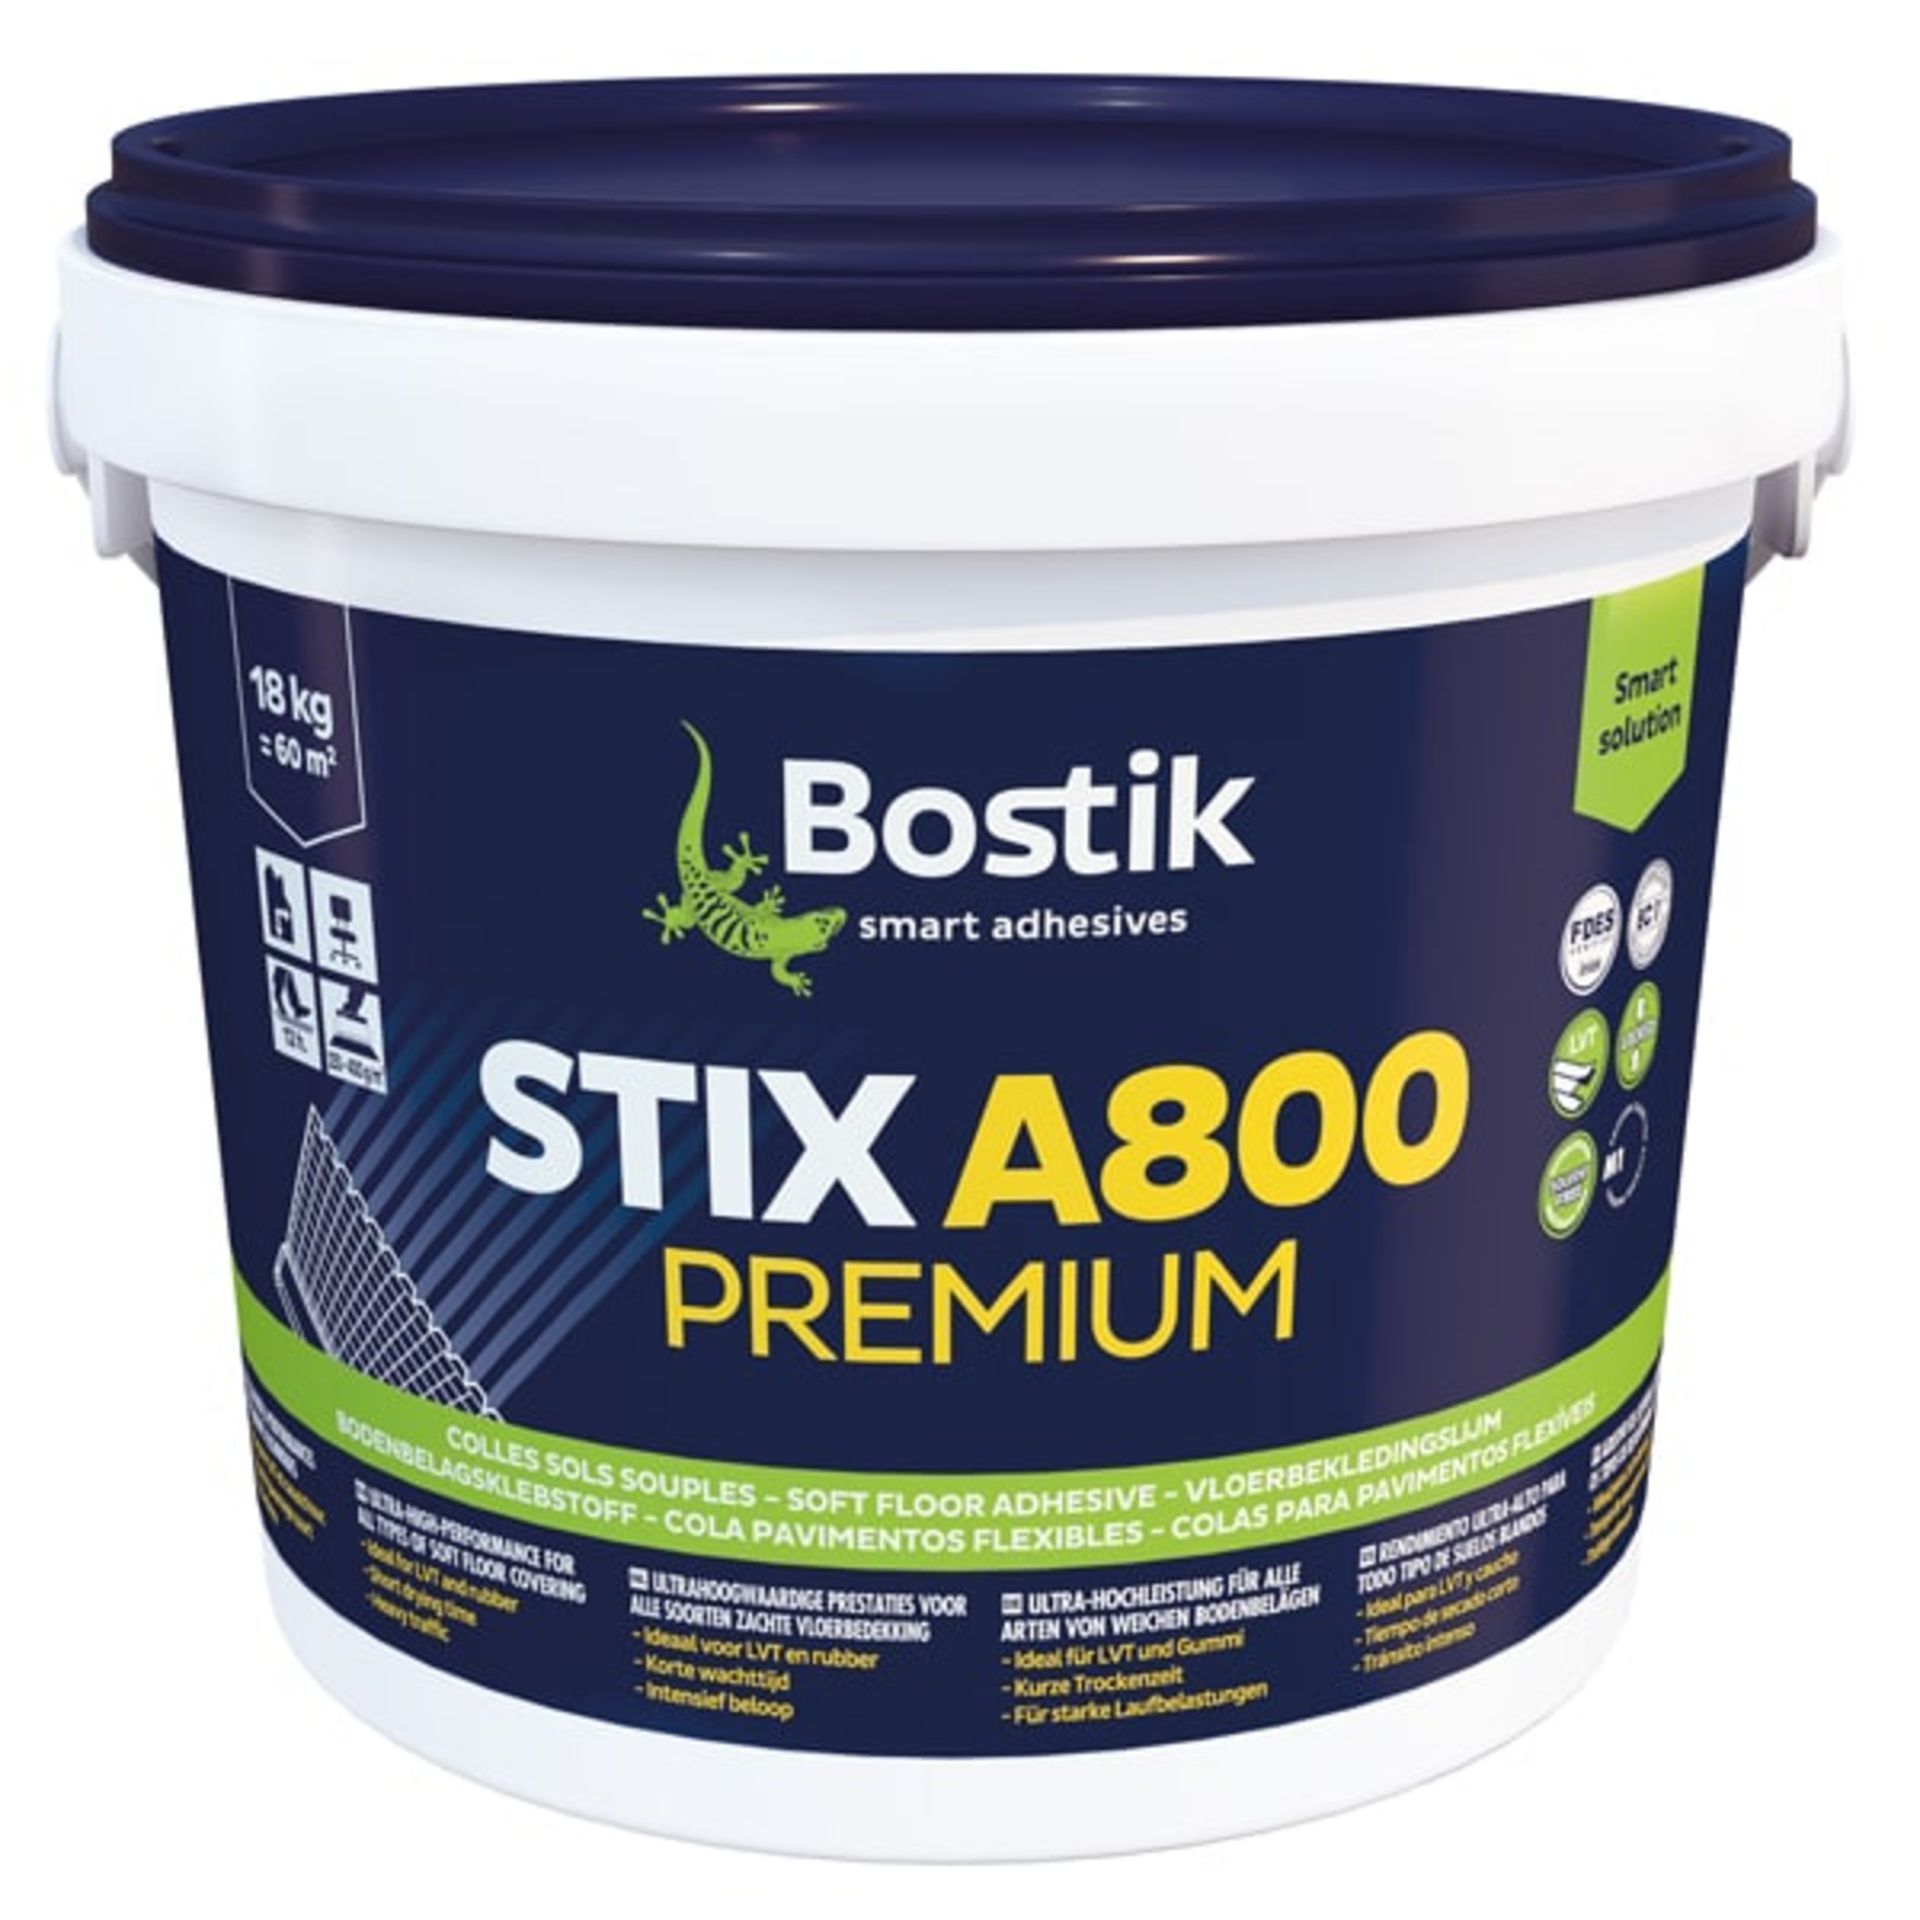 3 x New 18KG Tubs of Bostik Stix A800 Premium Ultra high performance acrylic adhesive for all